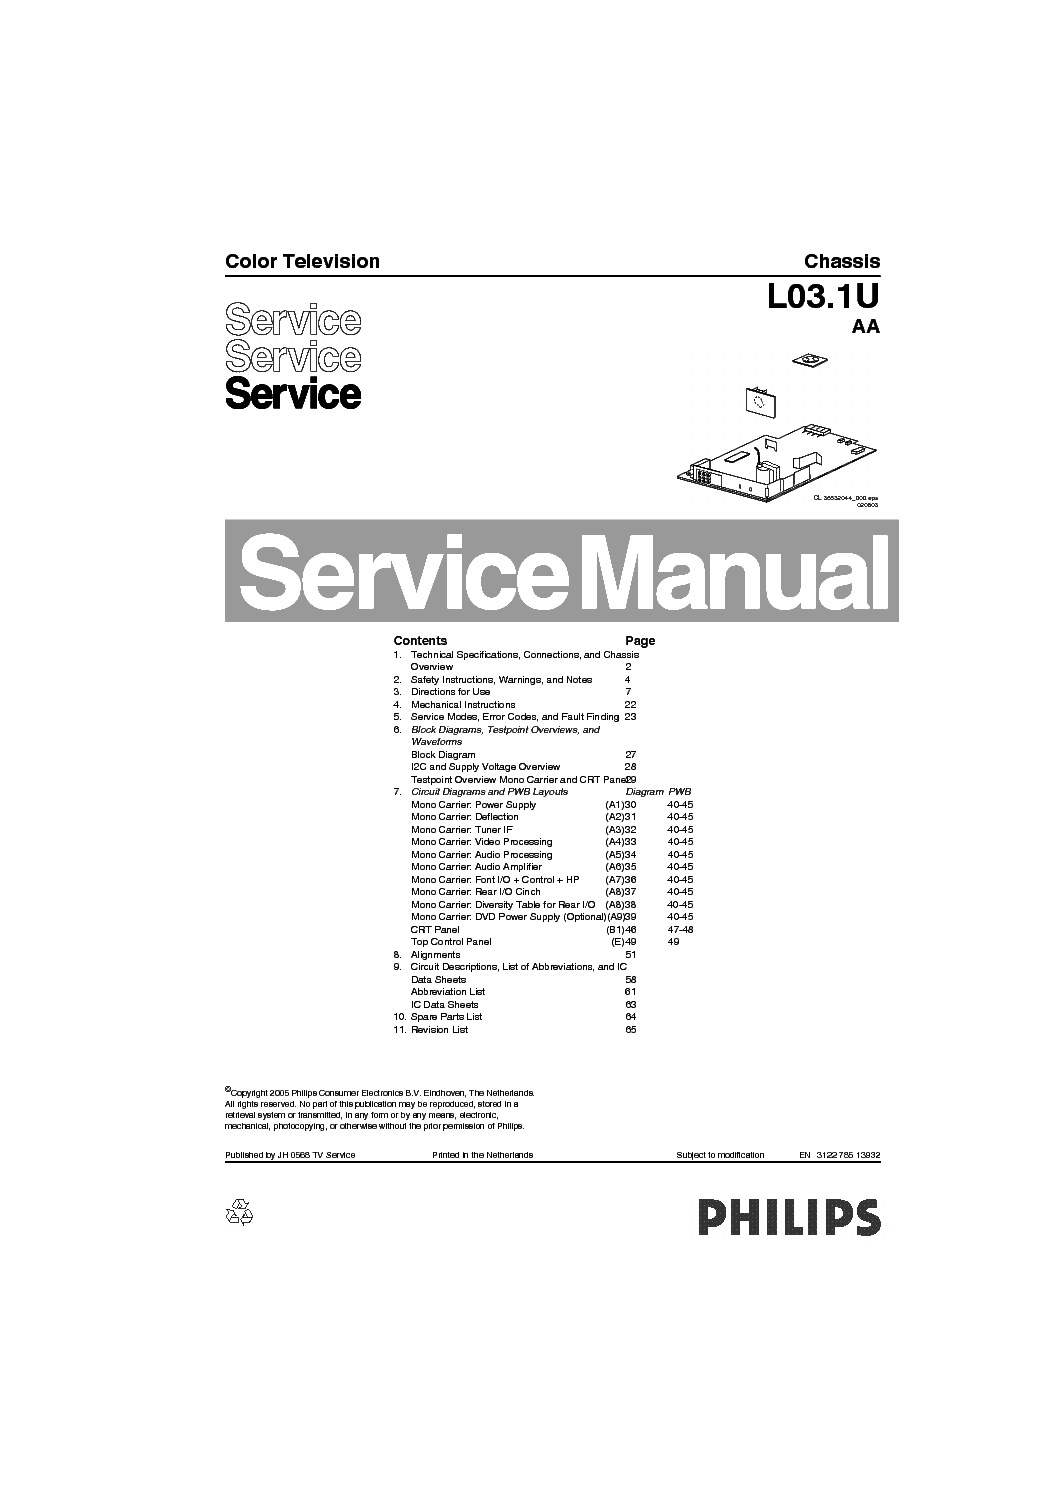 PHILIPS CHASSIS L03.1UAA service manual (1st page)